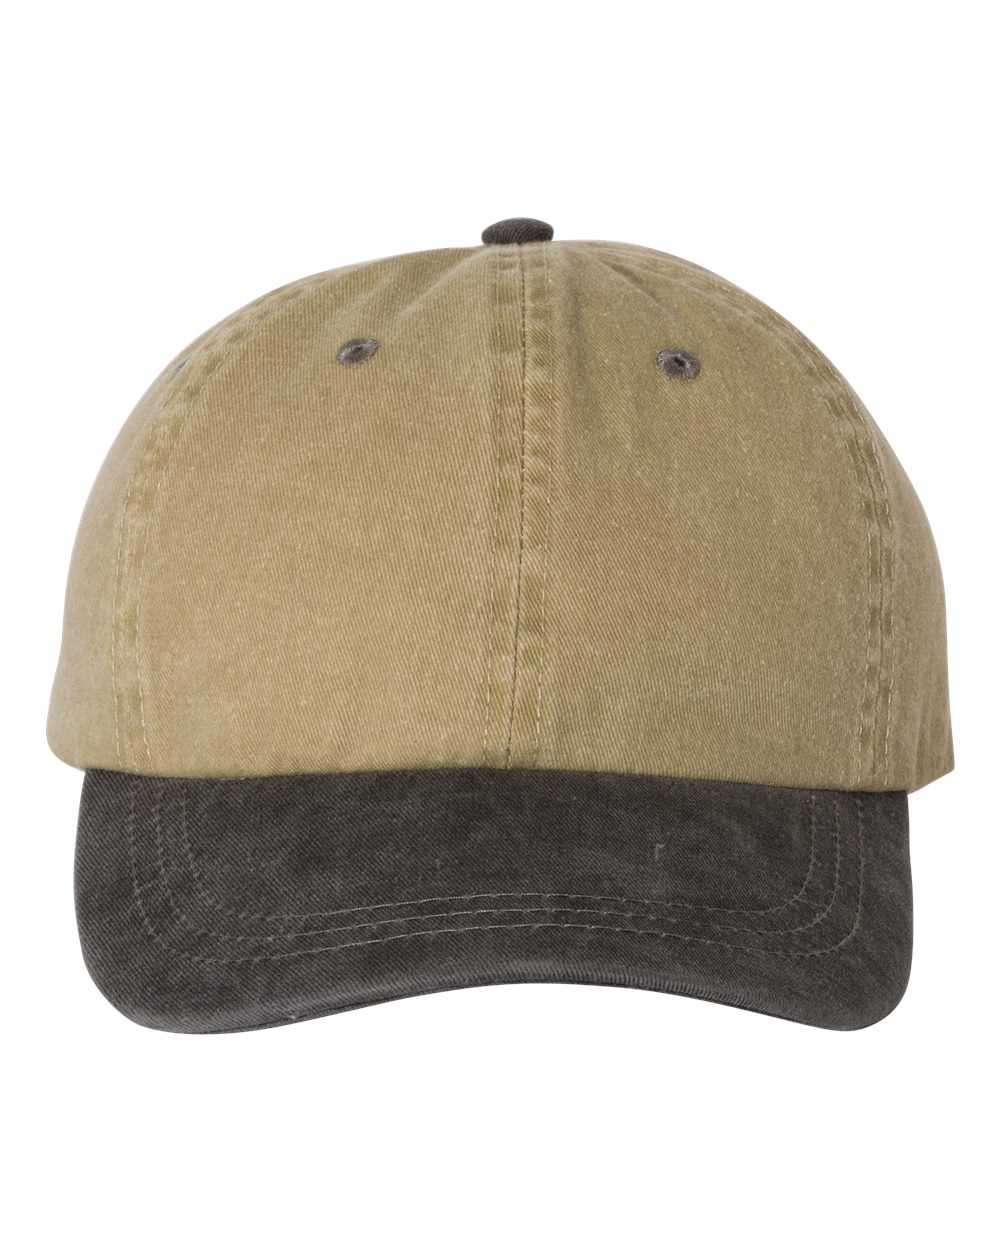 Pigment-Dyed Twill Cap - 7601-EAP